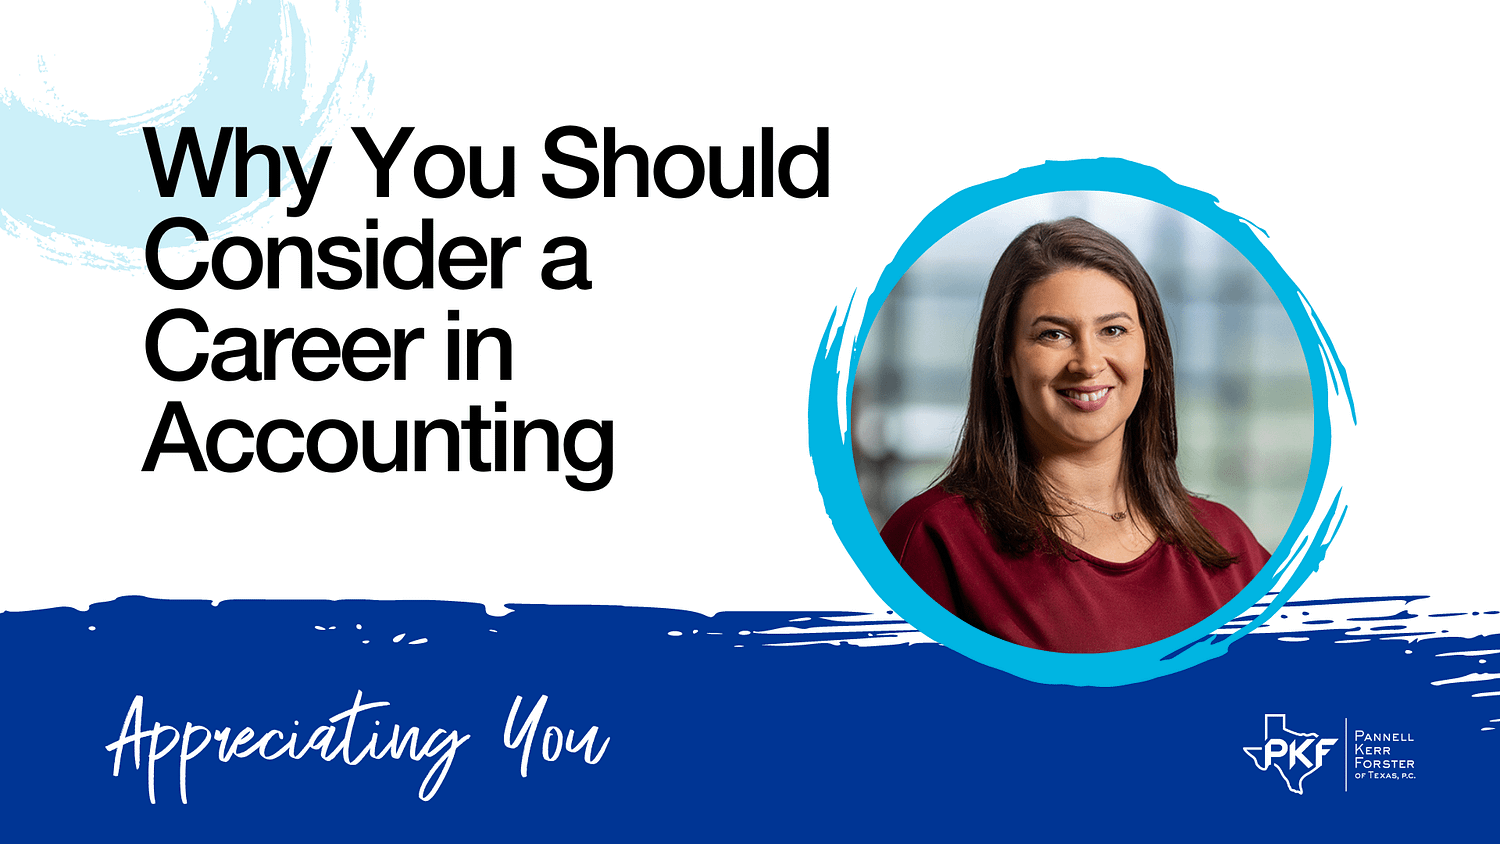 Why You Should Consider a Career in Accounting